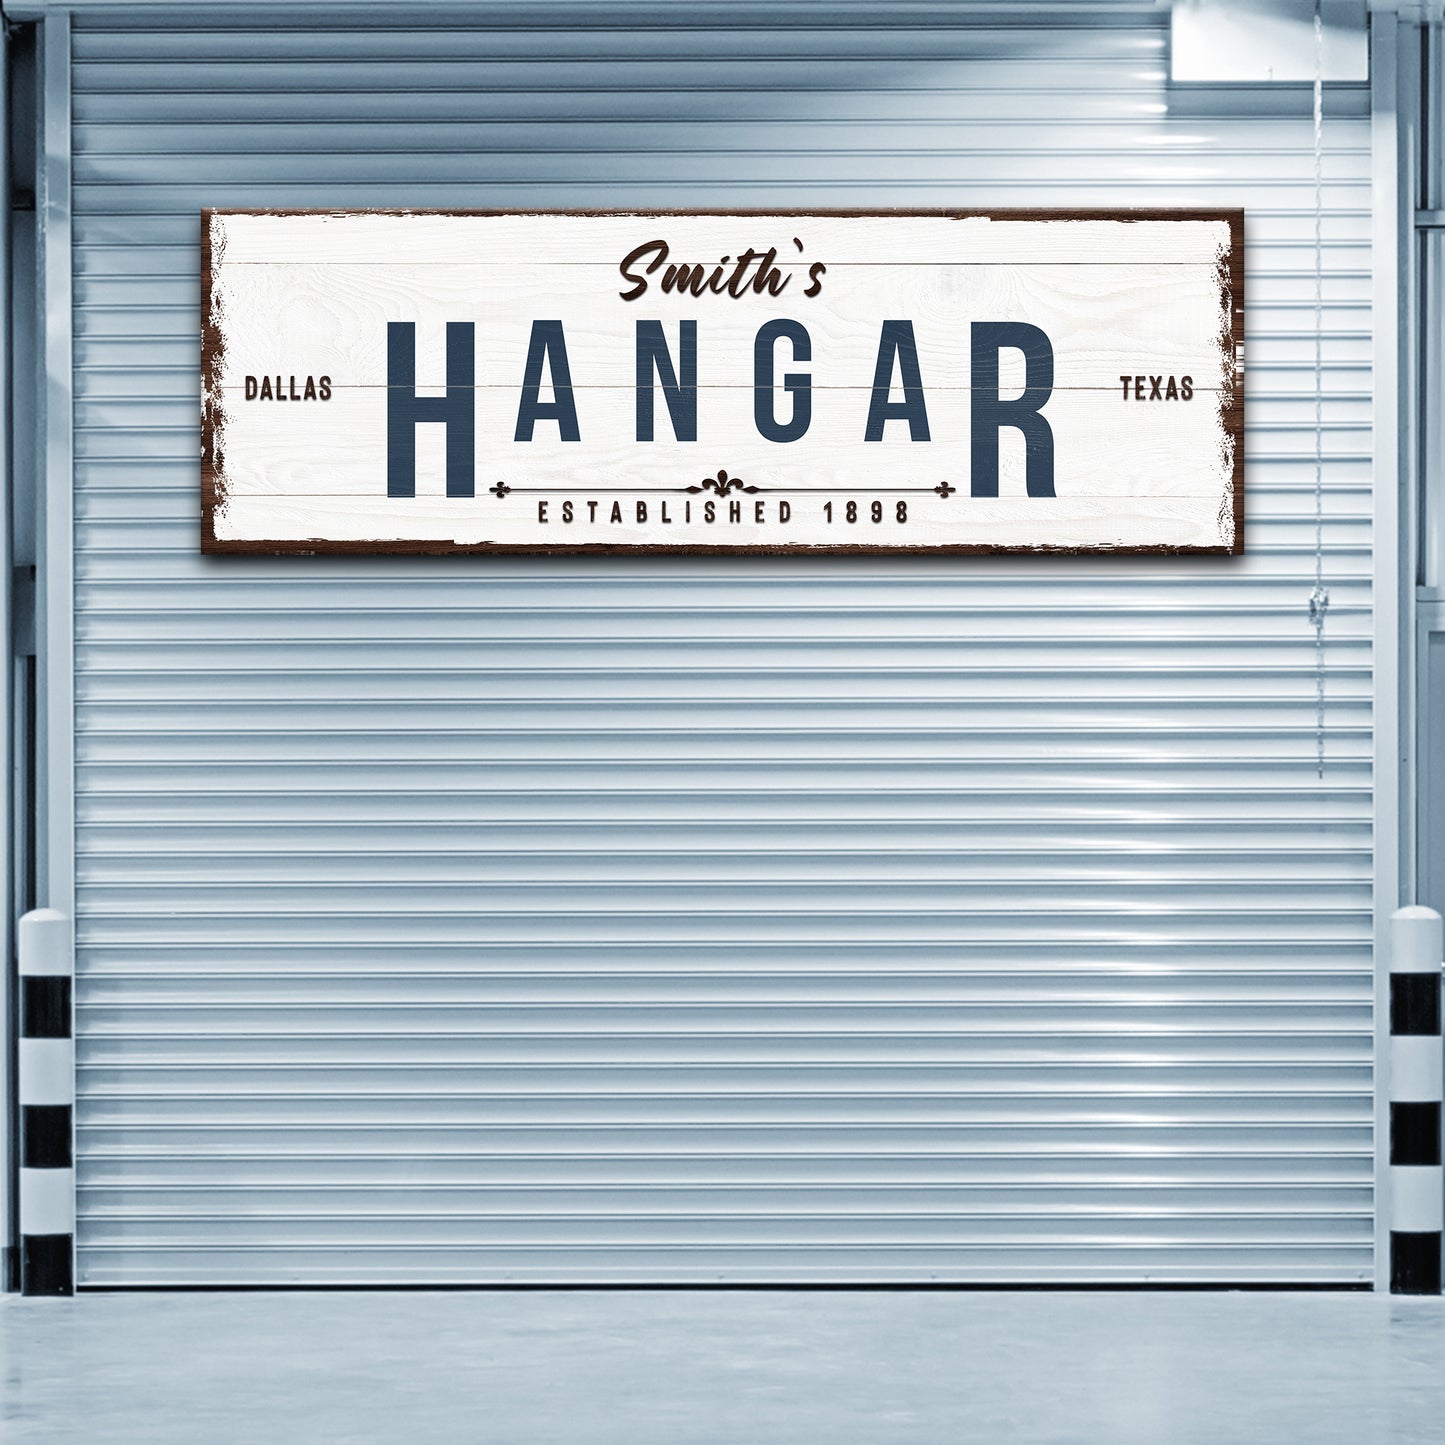 Hangar Sign - Image by Tailored Canvases